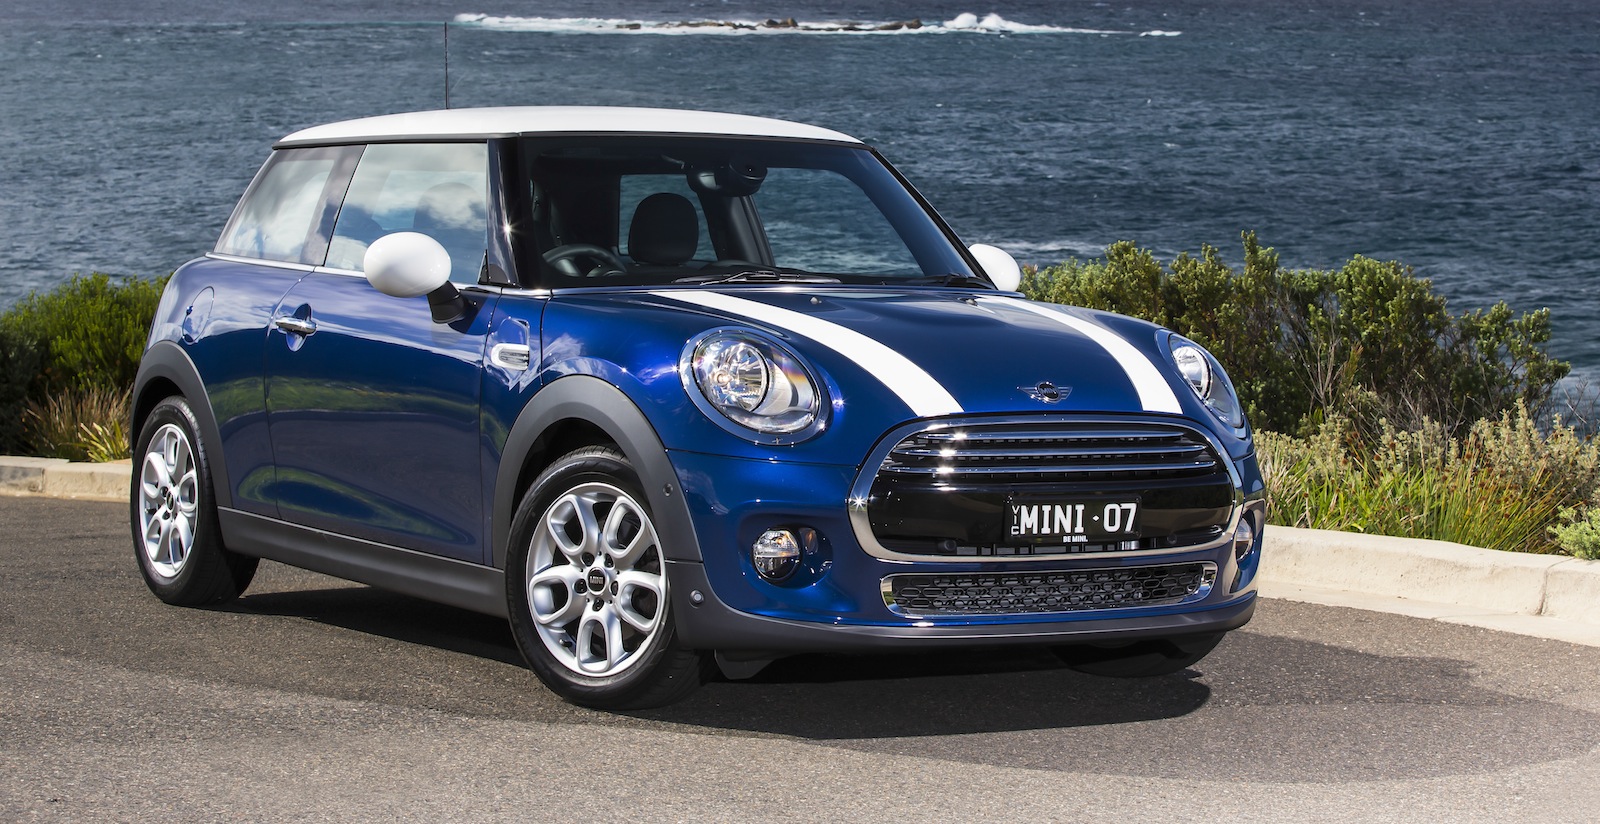 2014 Mini Cooper pricing and specifications - Photos (1 of 14)